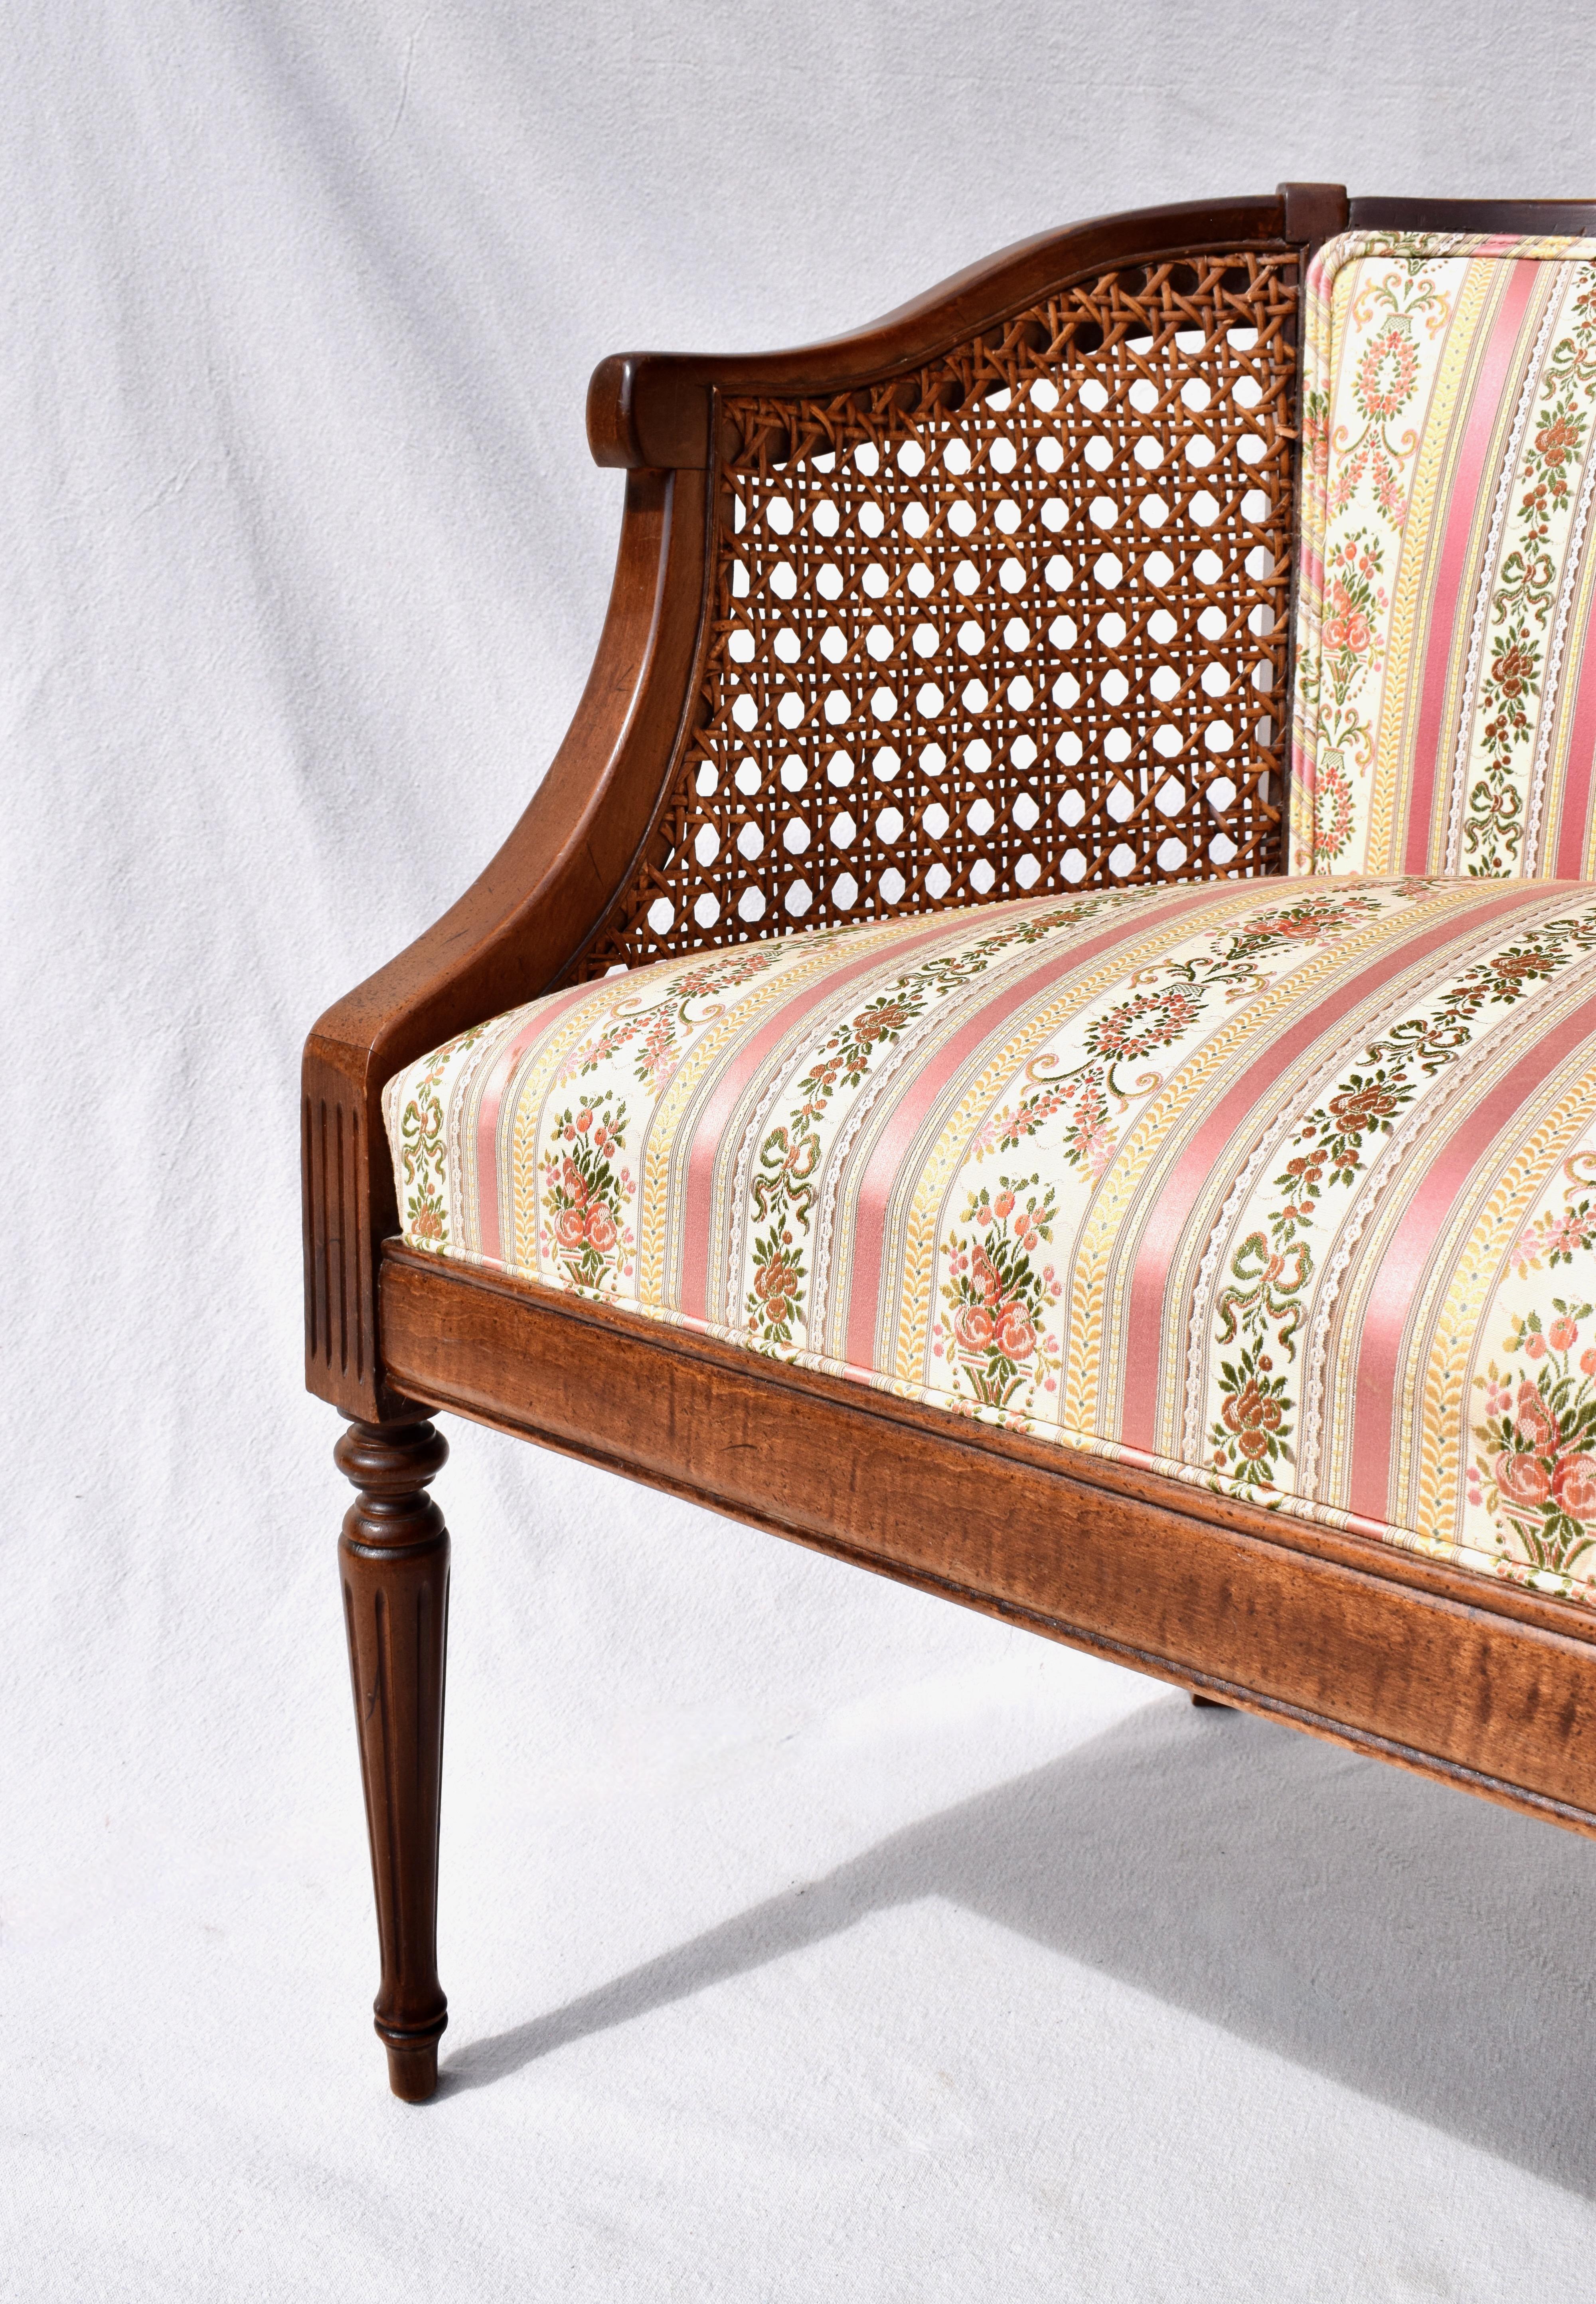 American French Louis XVI Style Cane Curve Back Settee For Sale